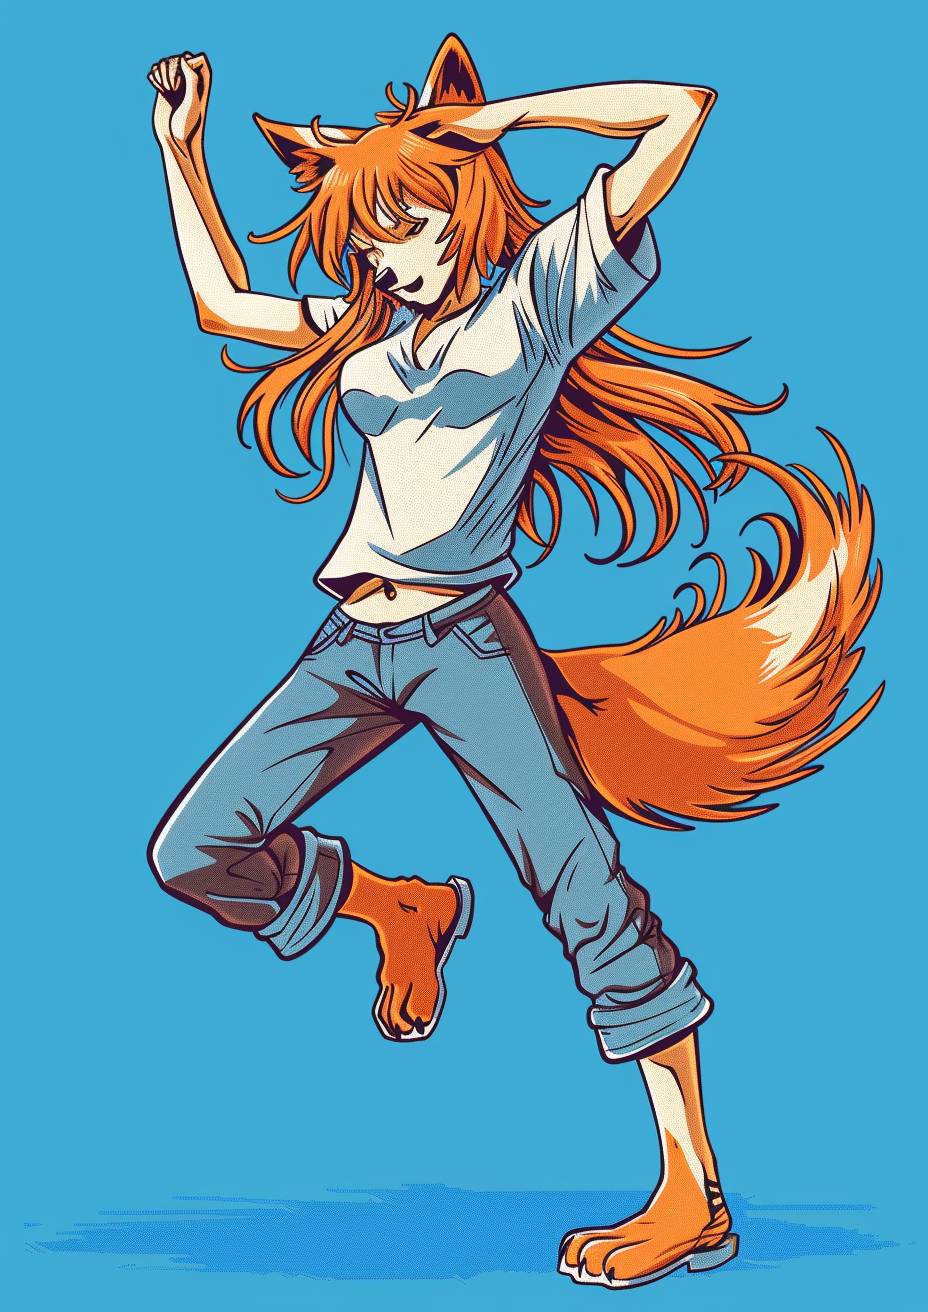 Spice and Wolf, dancing orange haired Holo character illustration, blue background, Keith Haring style doodle, Sharpie illustration, midline and solid color, simple details, minimalist.